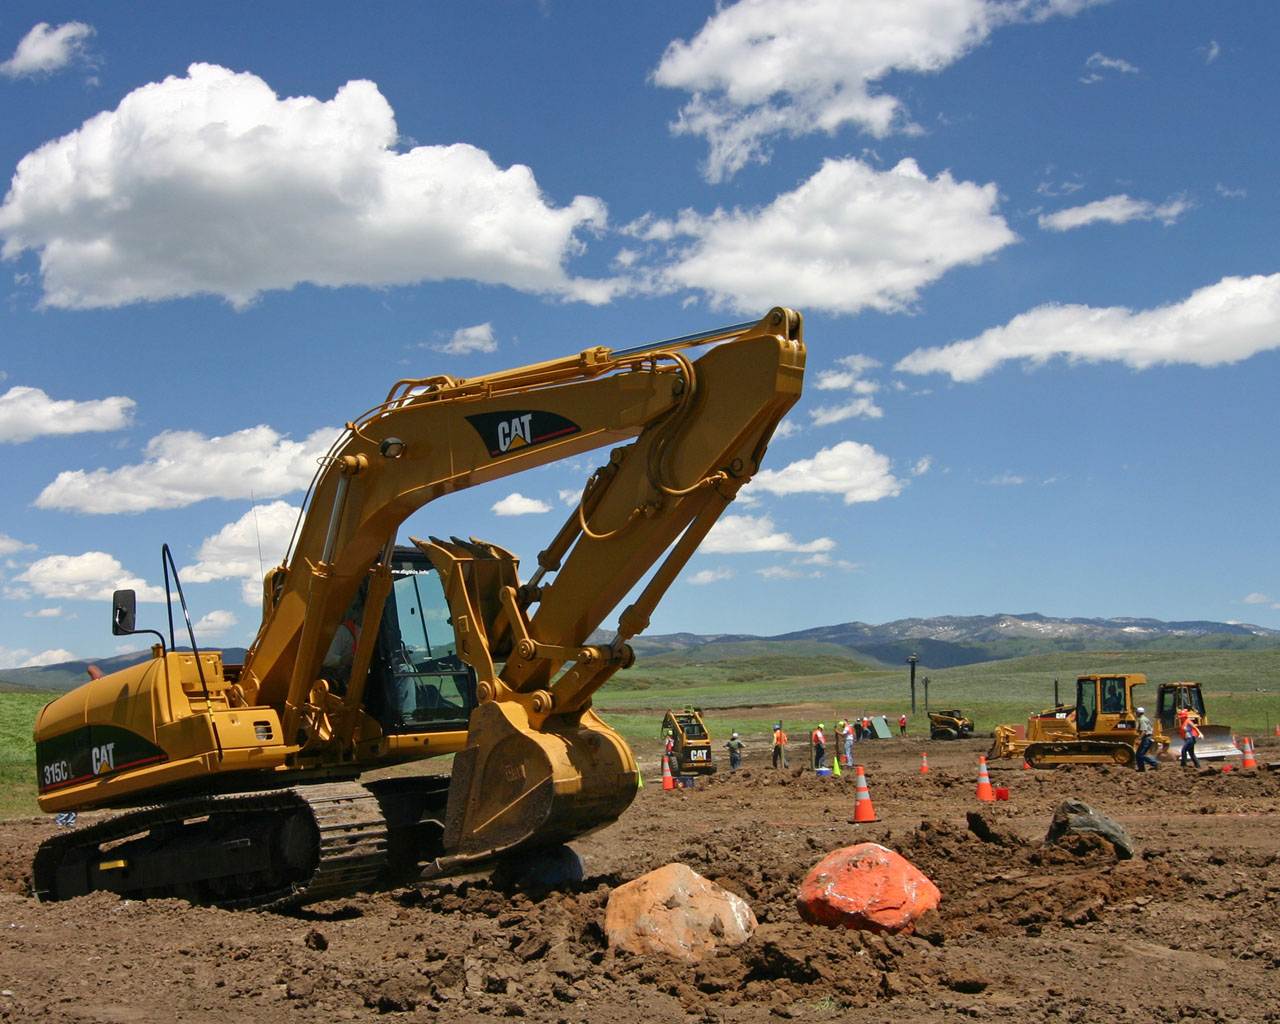 Operating heavy construction equipment at Dig This